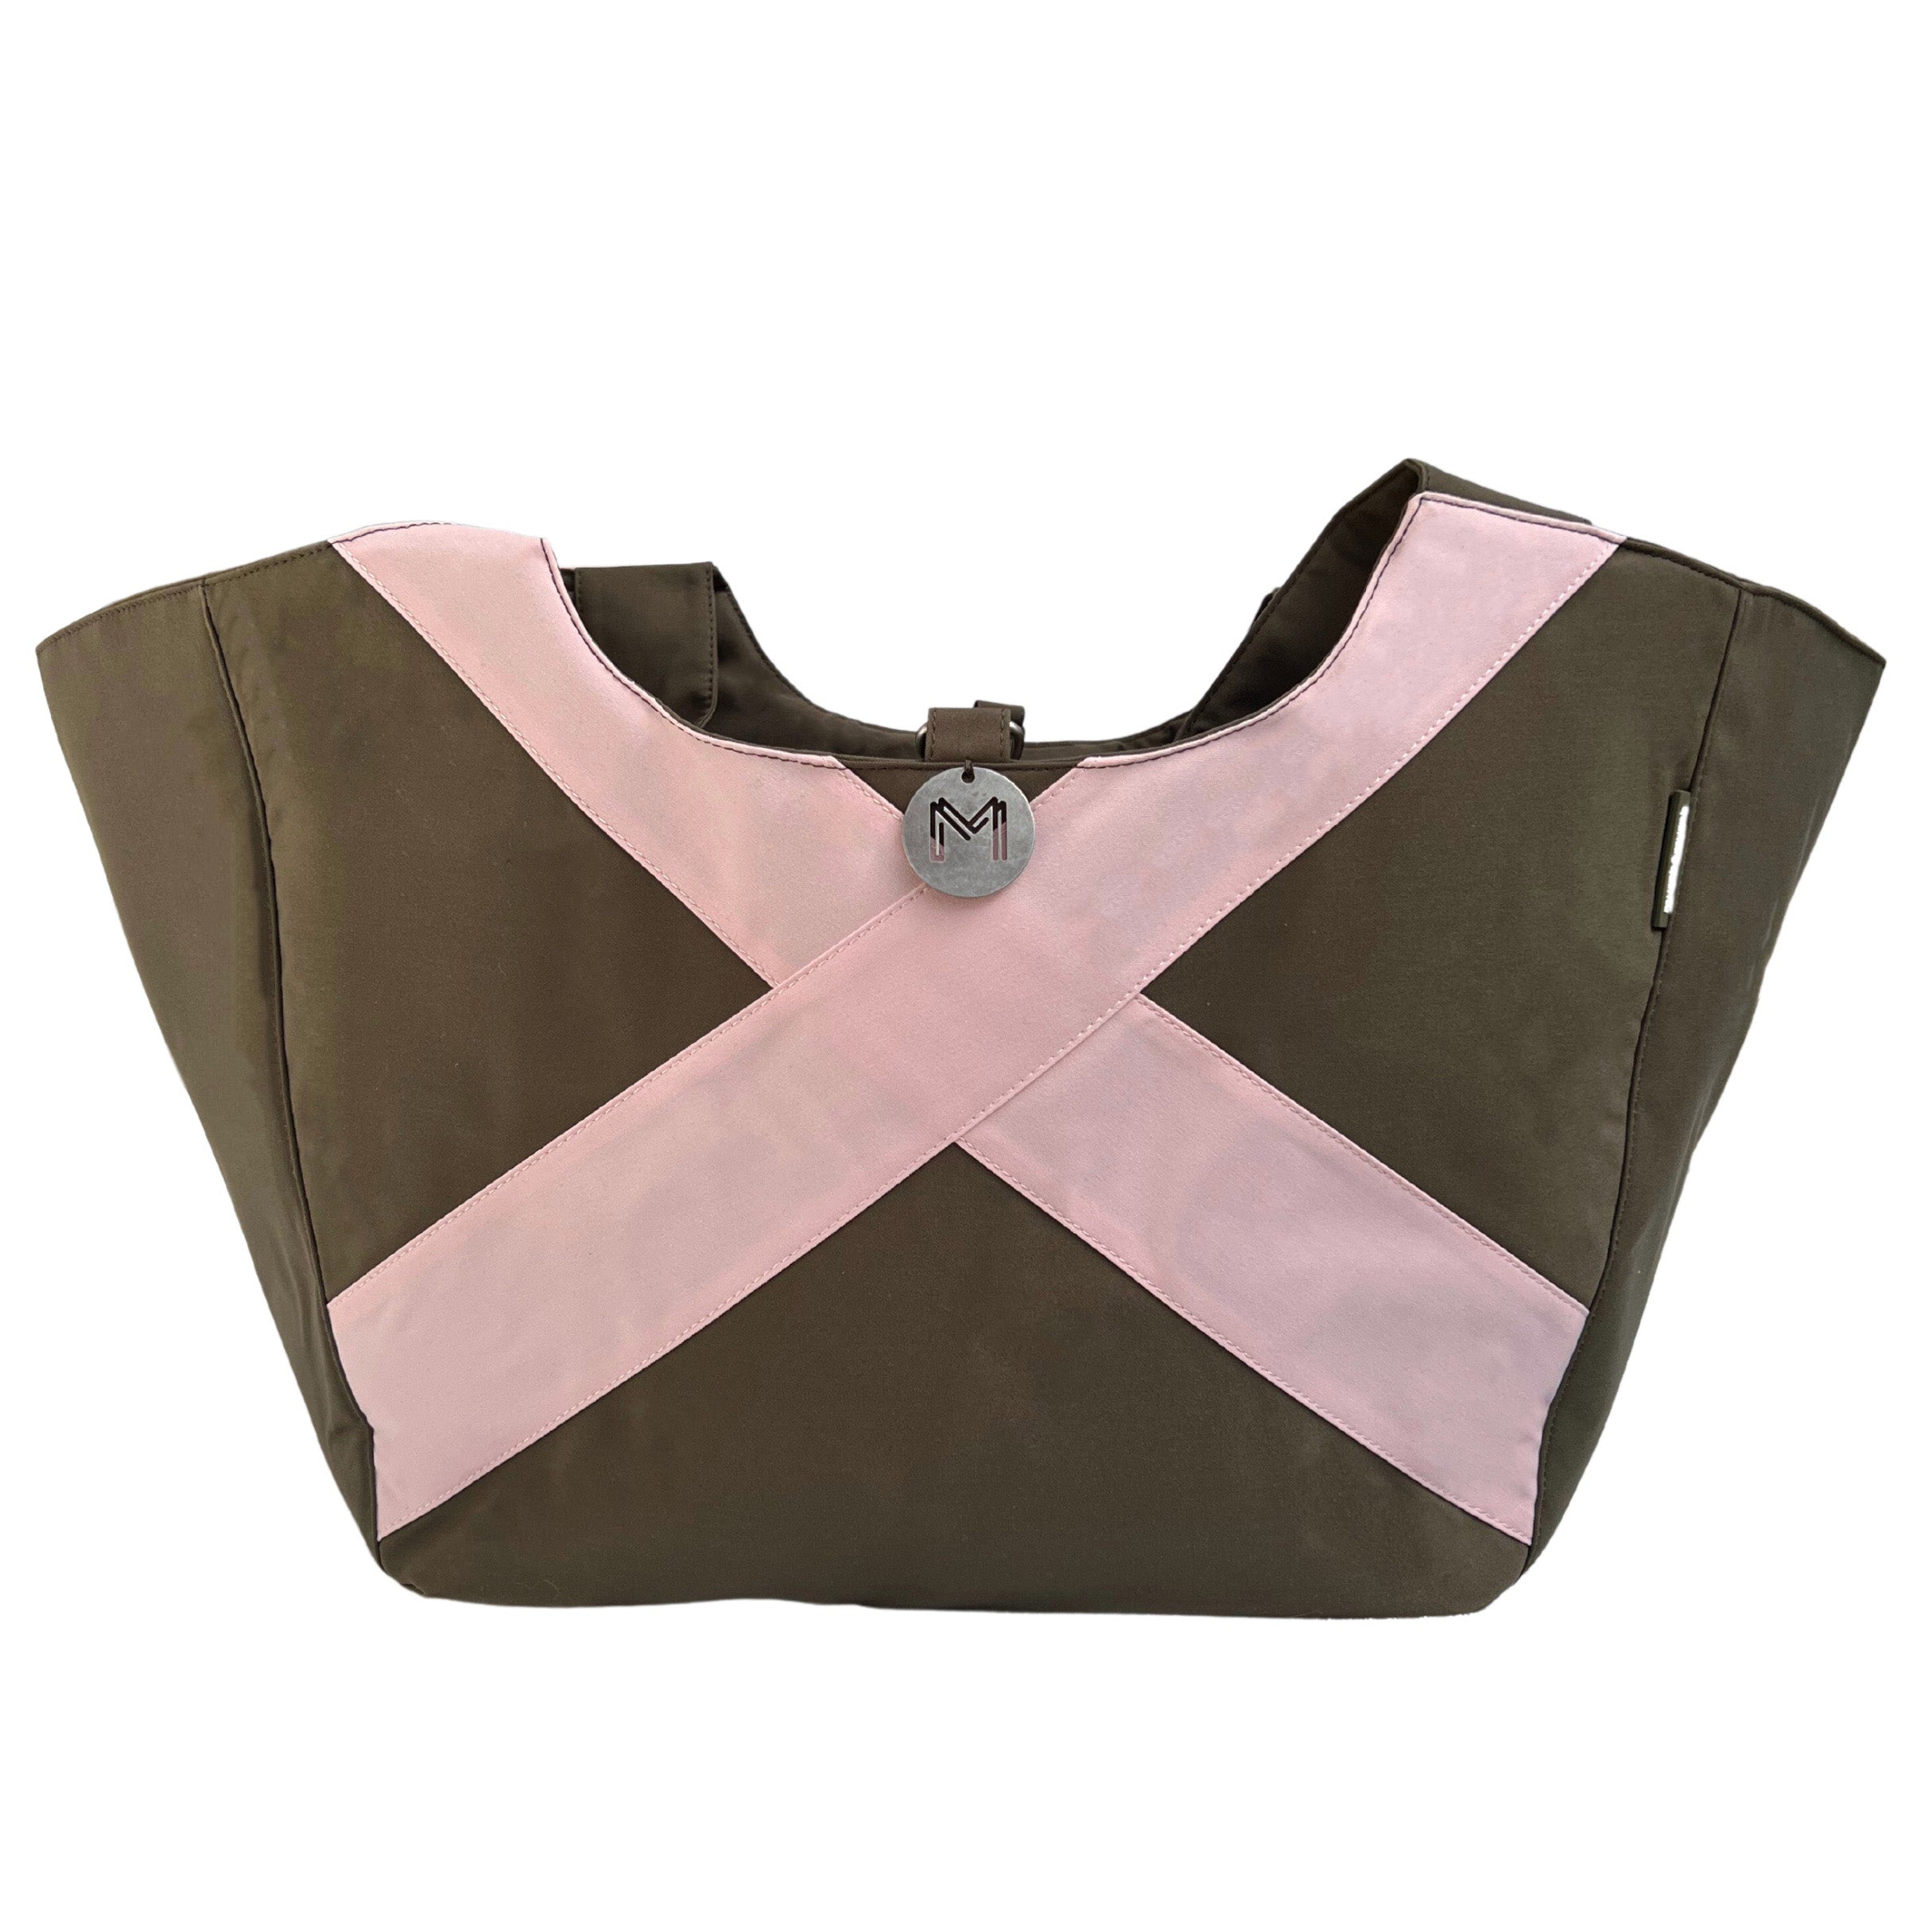 Cove Carry-All - Khaki with Pastel Pink Cross (LAST ONE)